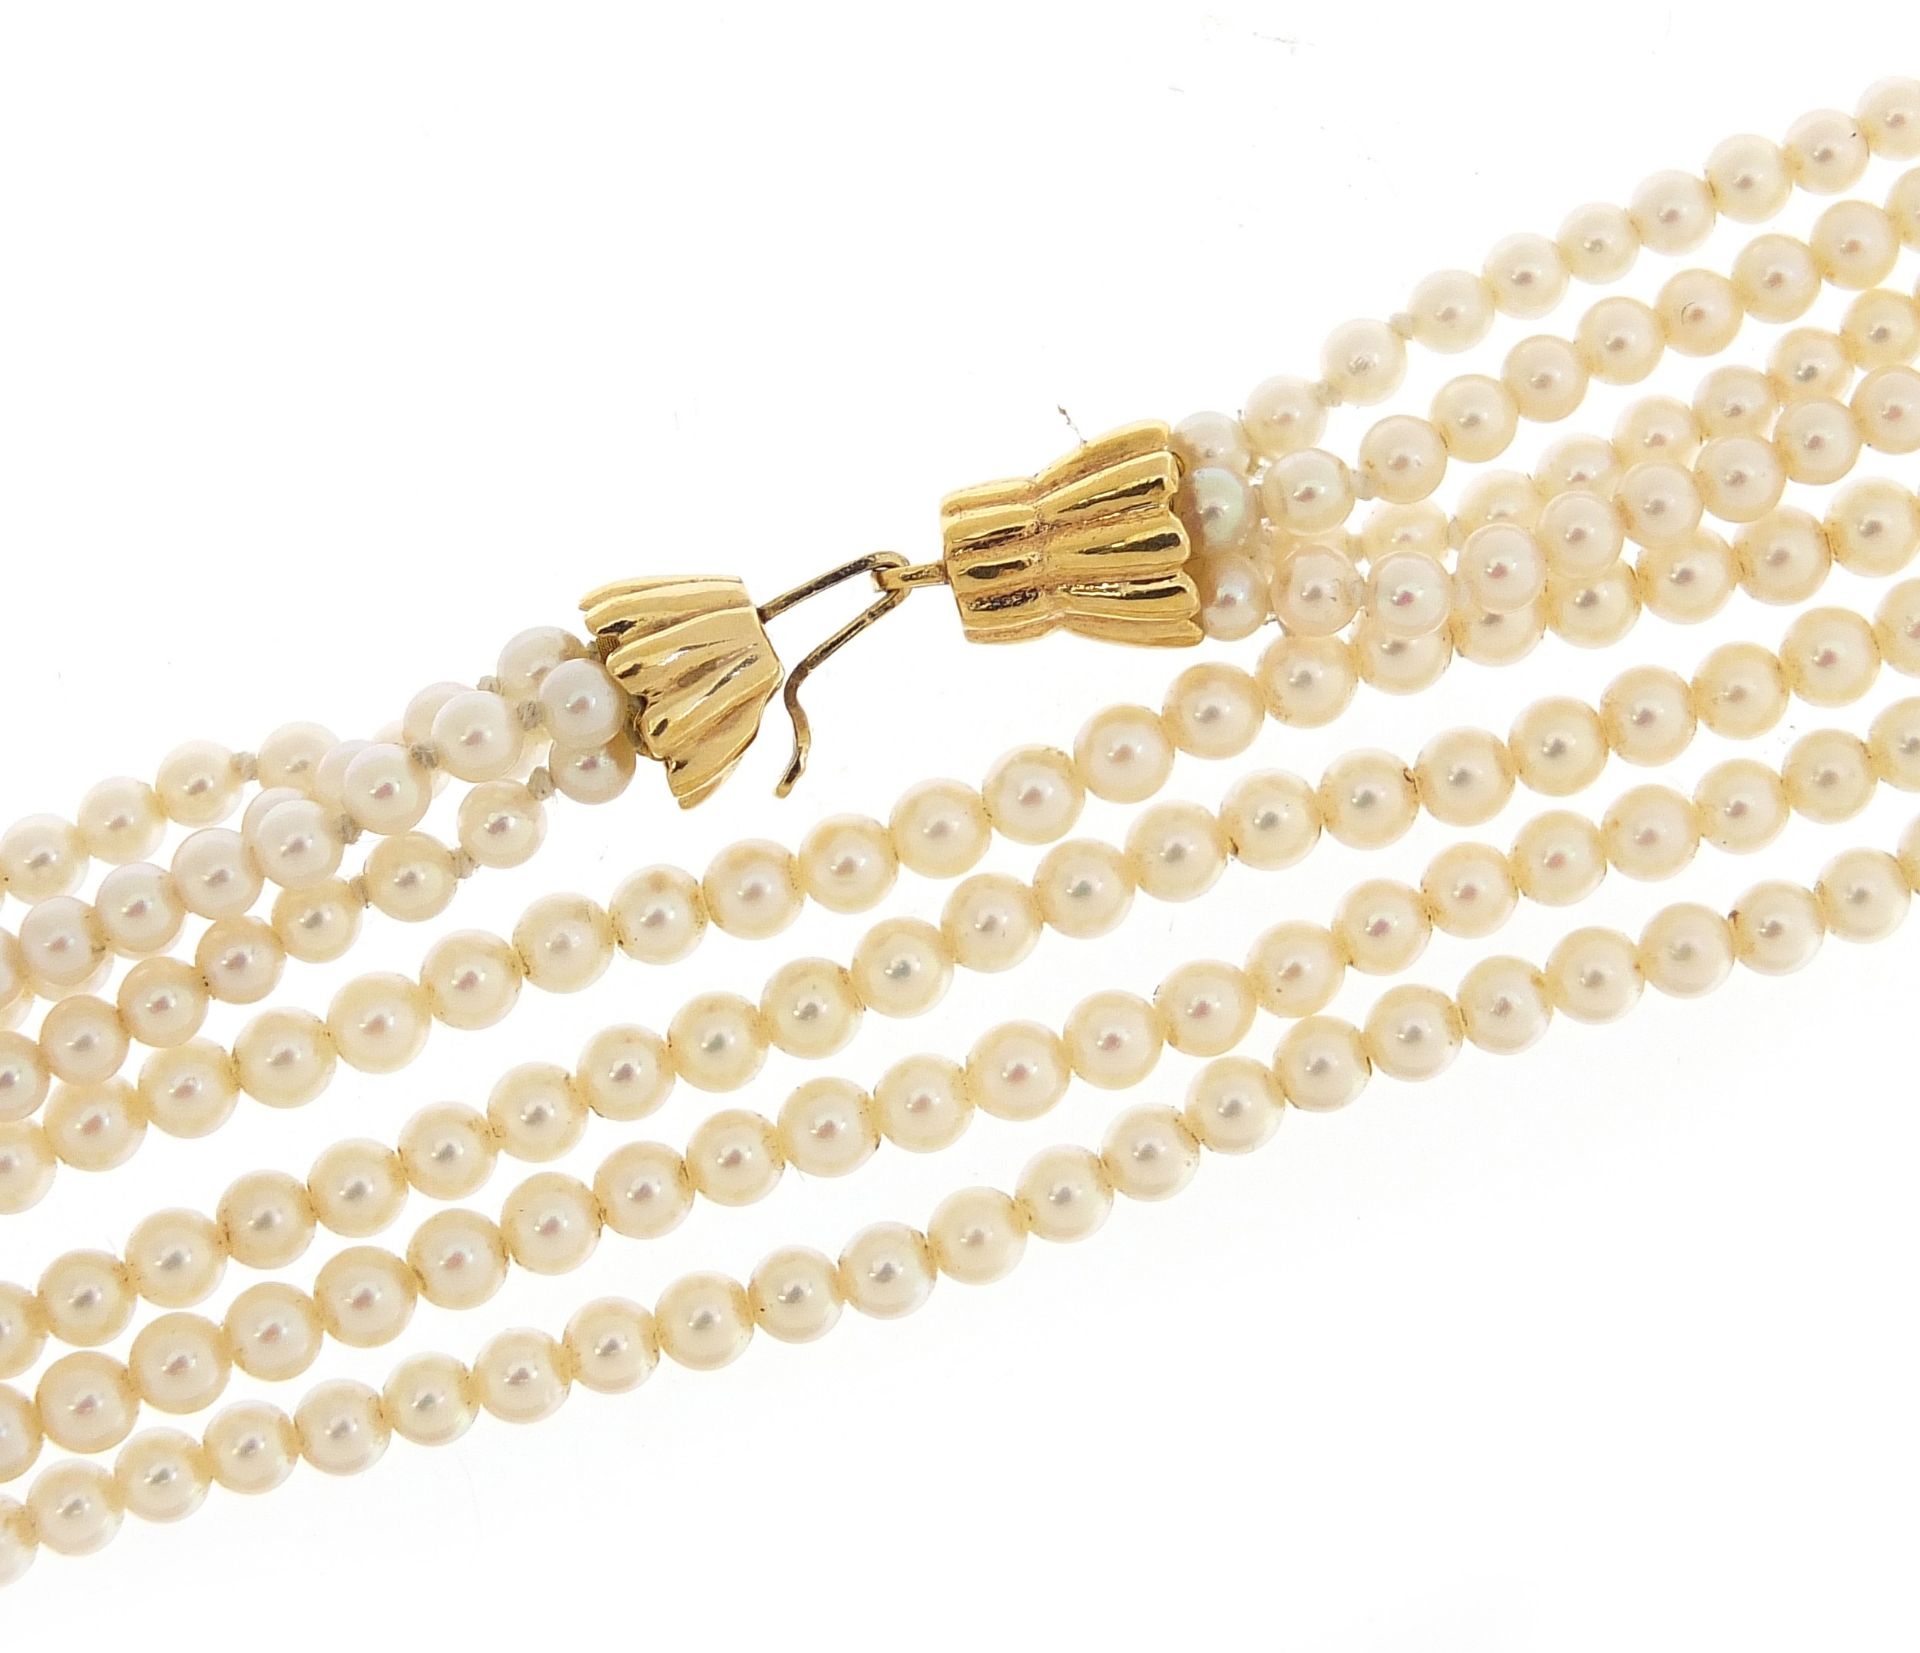 Mappin & Webb four row pearl necklace with 18ct gold clasp, 45cm in length, 29.0g